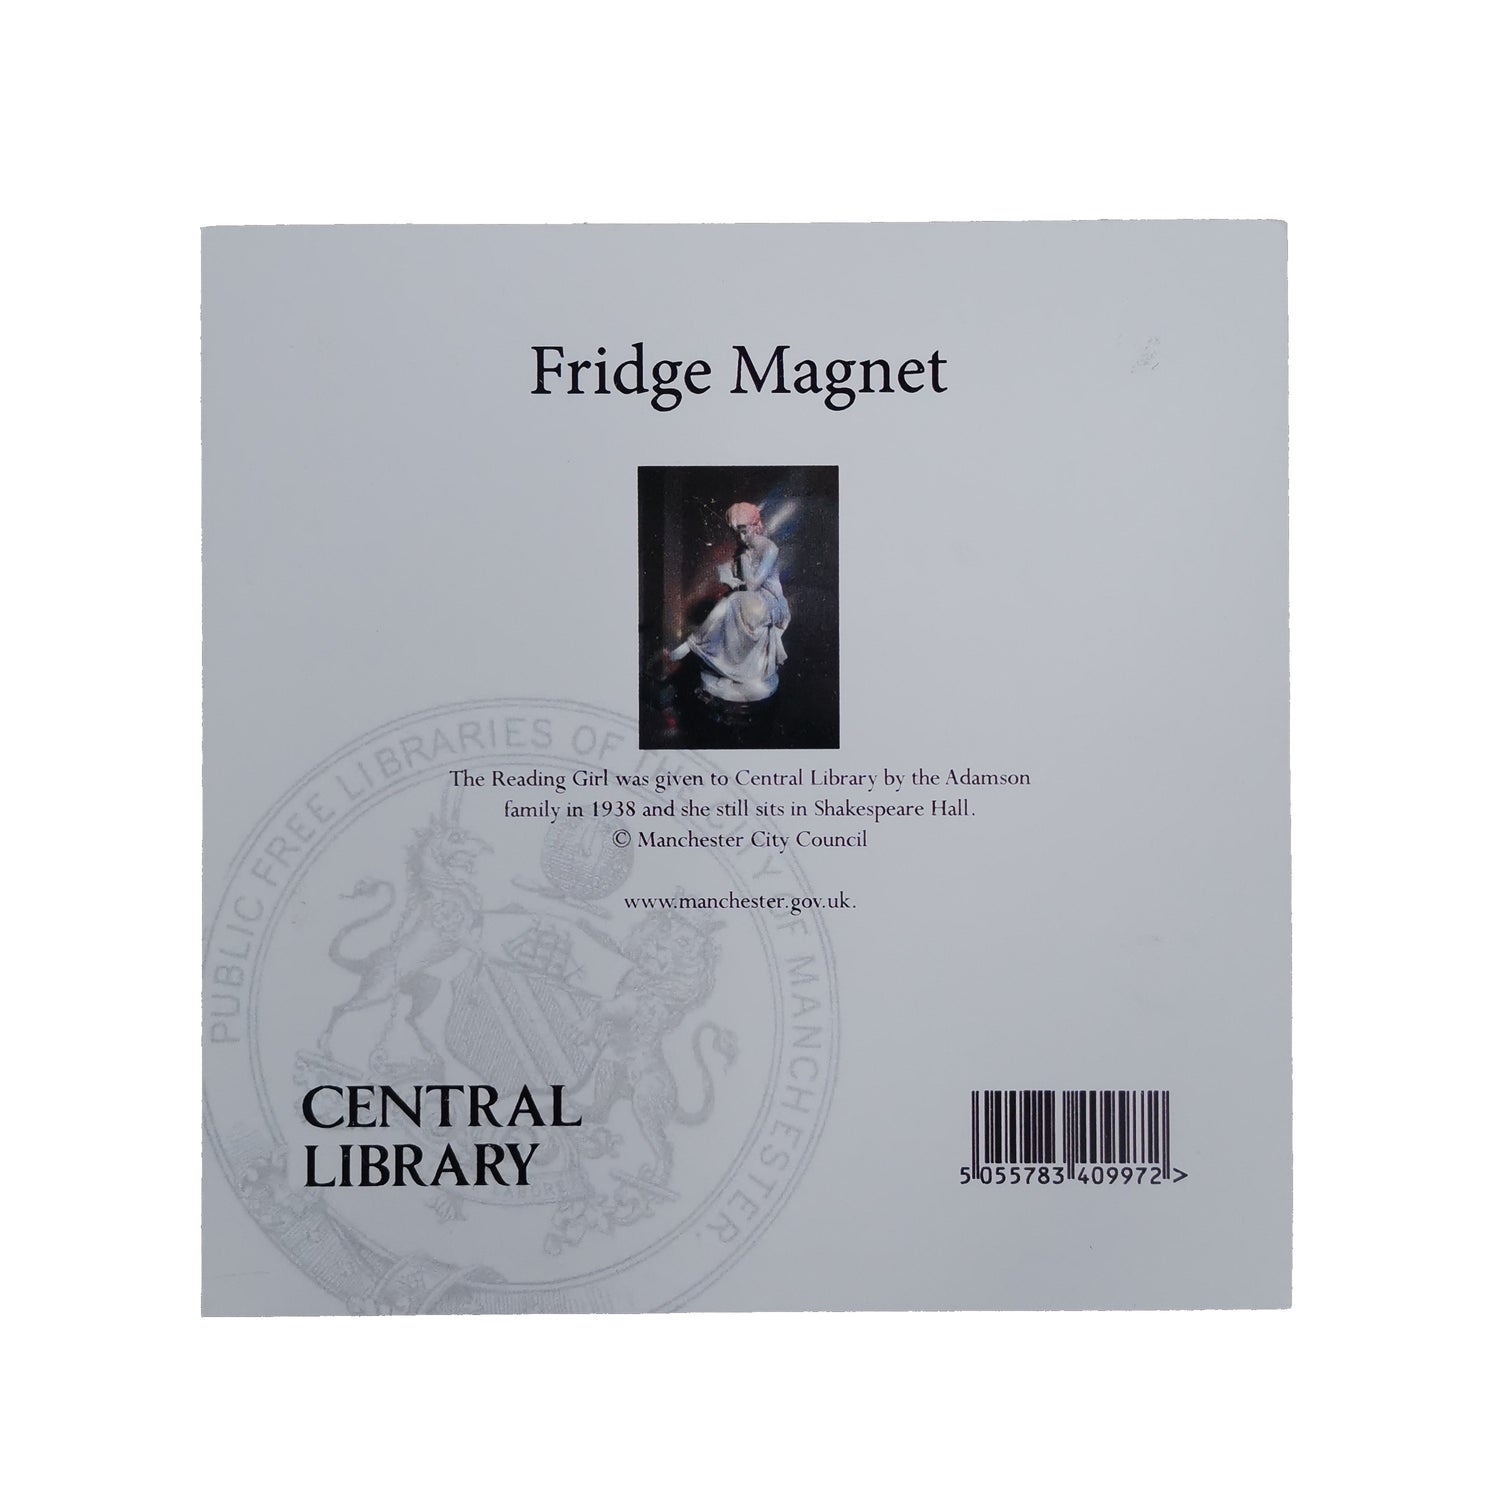 Rear card from the reading girl magnet with an image of the magnet and the central library logo